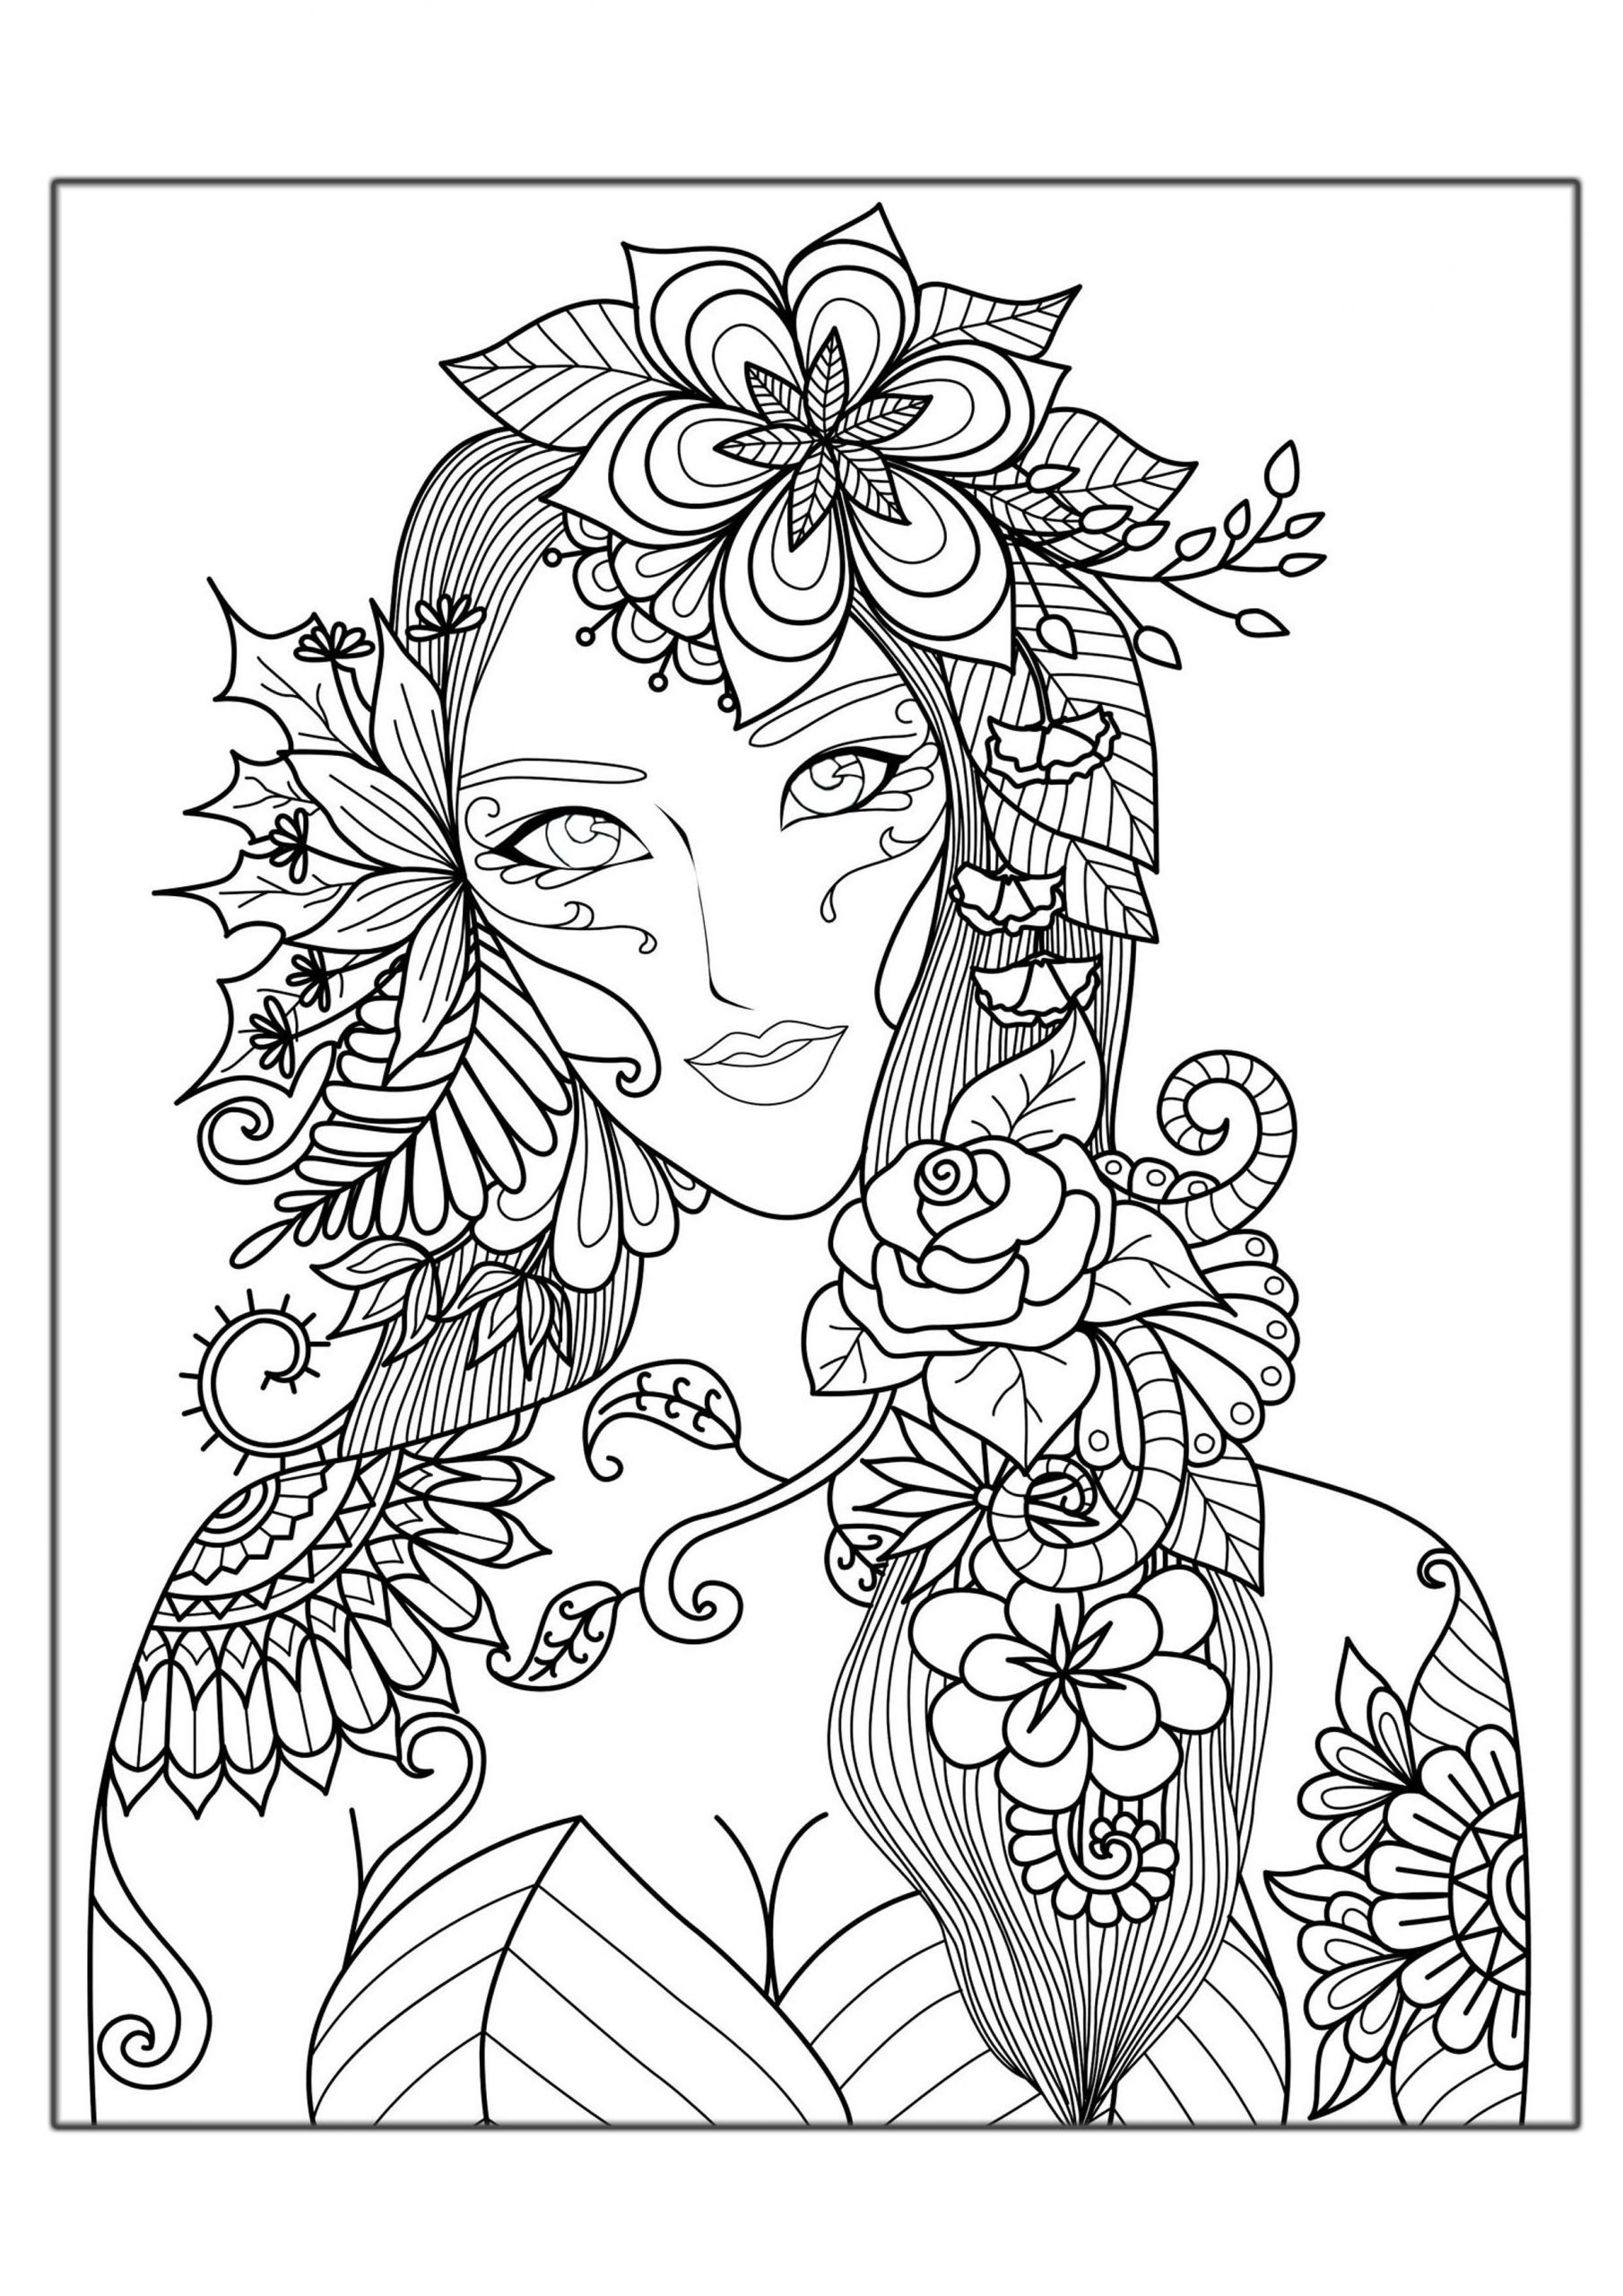 Online Adult Coloring Book
 Hard Coloring Pages for Adults Best Coloring Pages For Kids